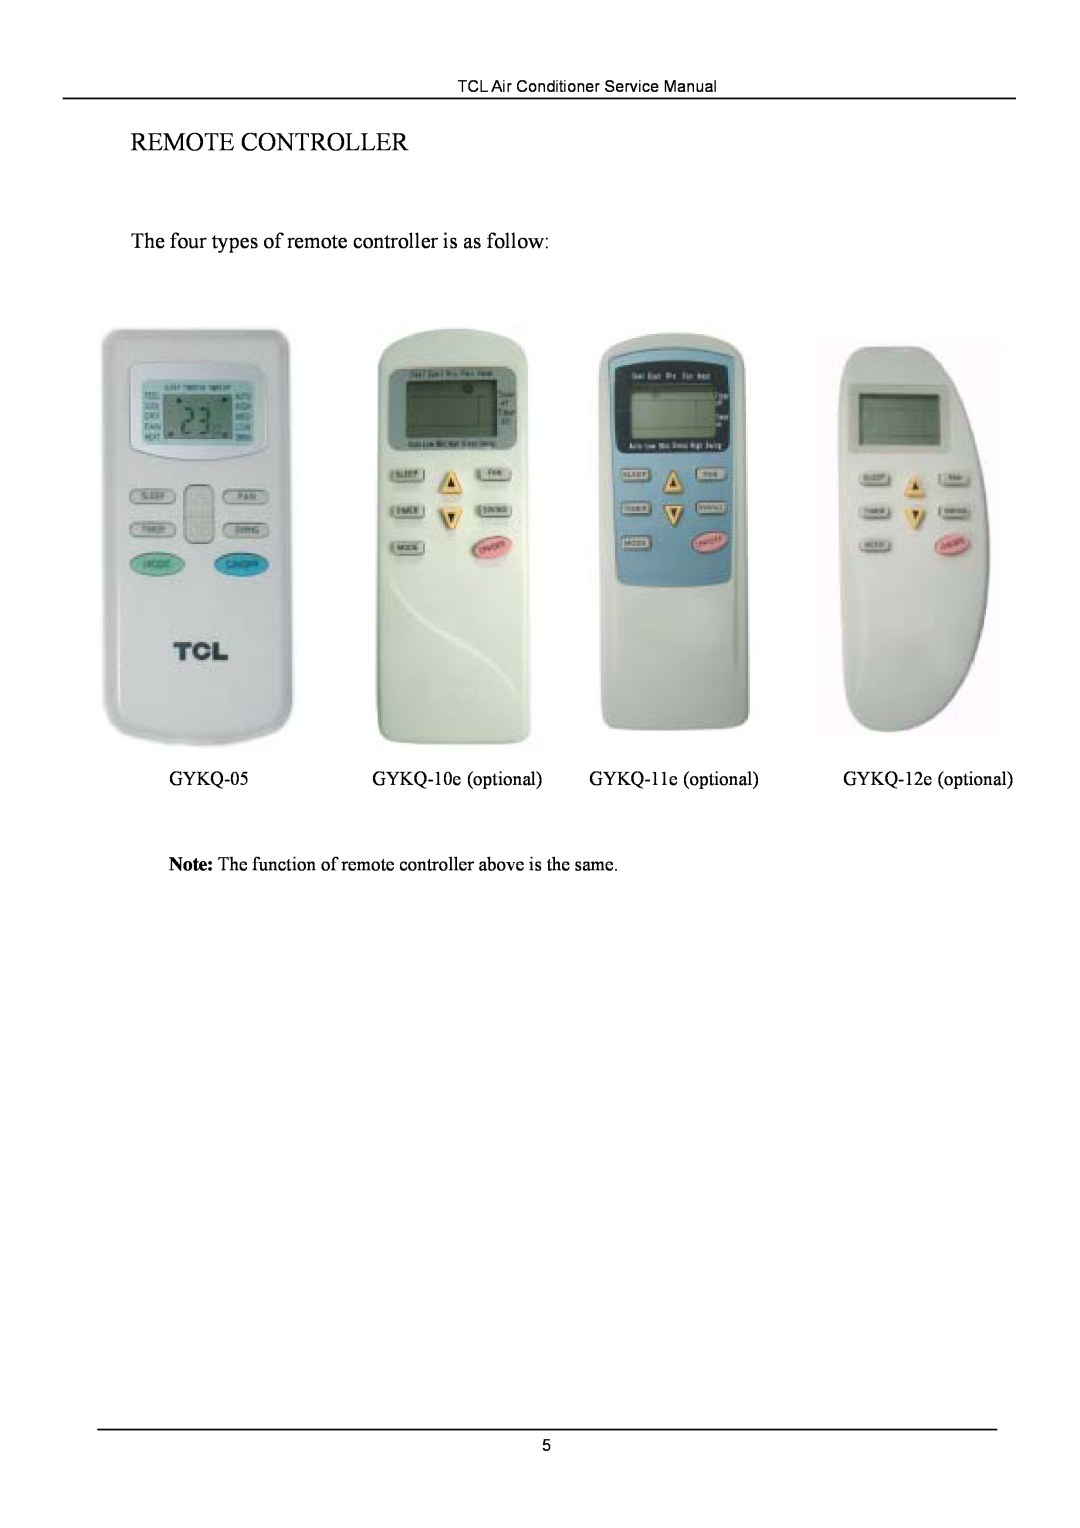 Soleus Air KFTHP-12, KFTHP-09, KFTHP-18, KFTHP-24 Remote Controller, The four types of remote controller is as follow 